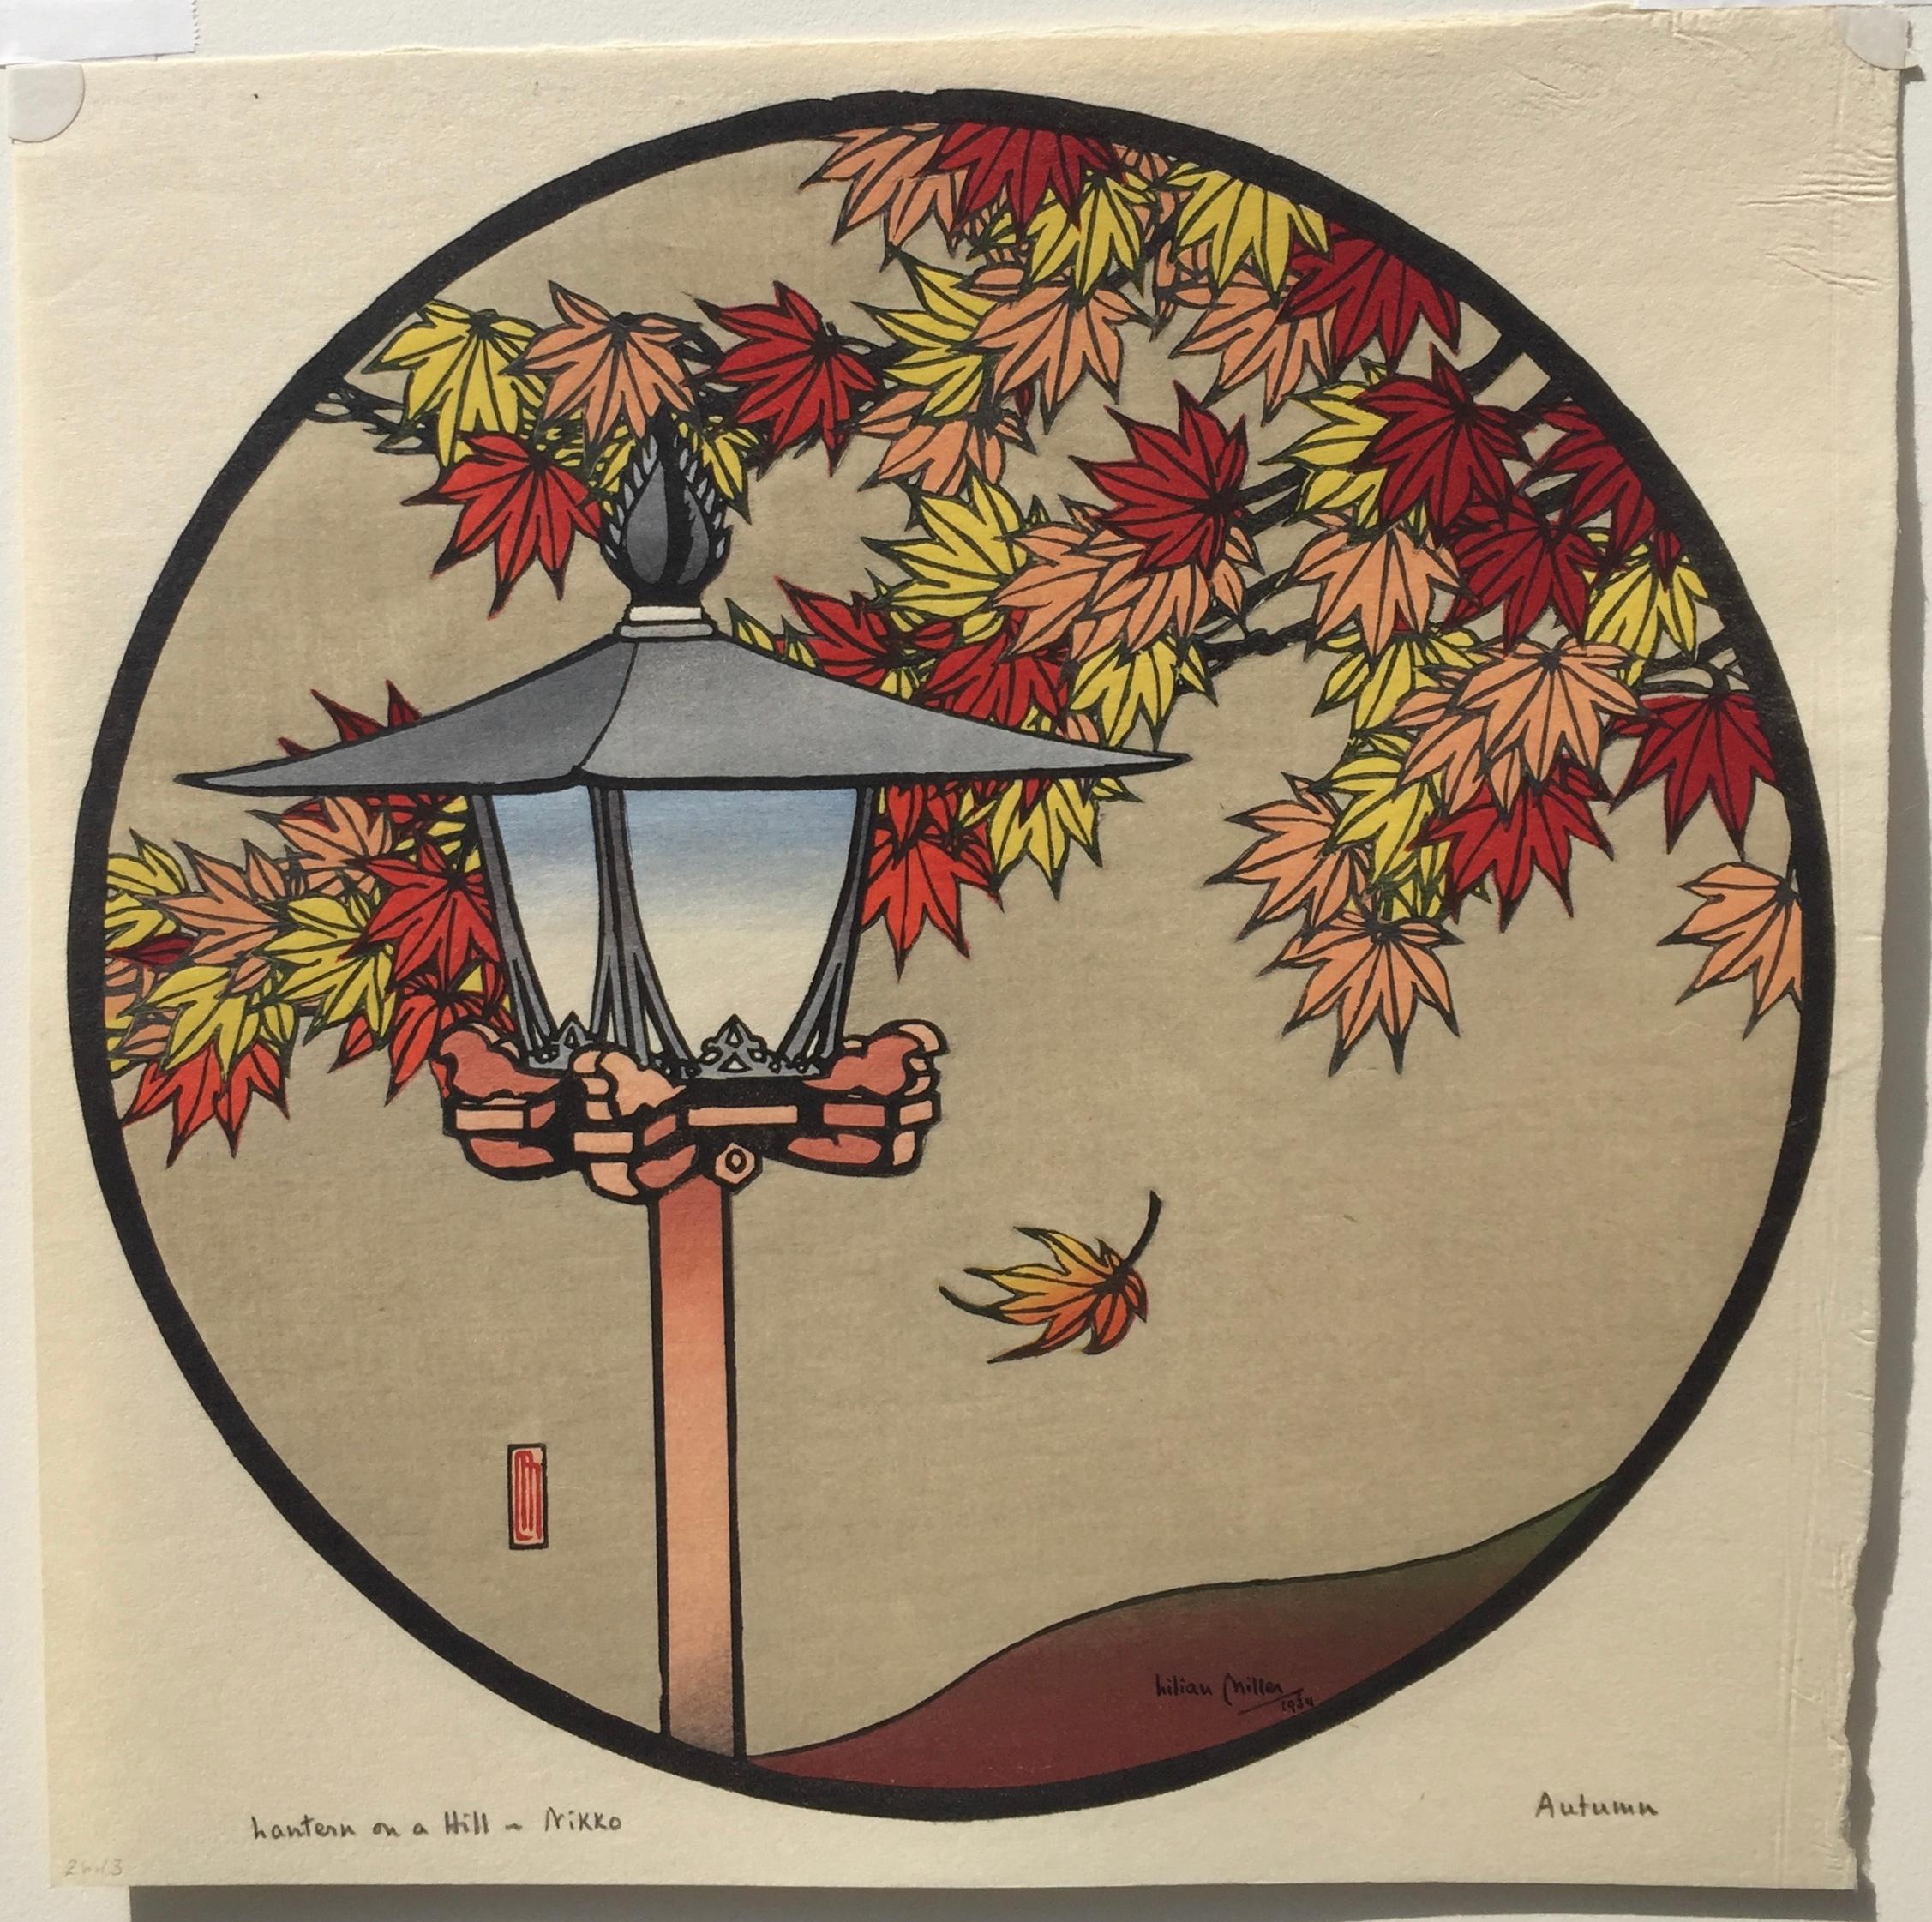 LANTERN ON A HILL - NIKKO - AUTUMN - Print by Lilian May Miller